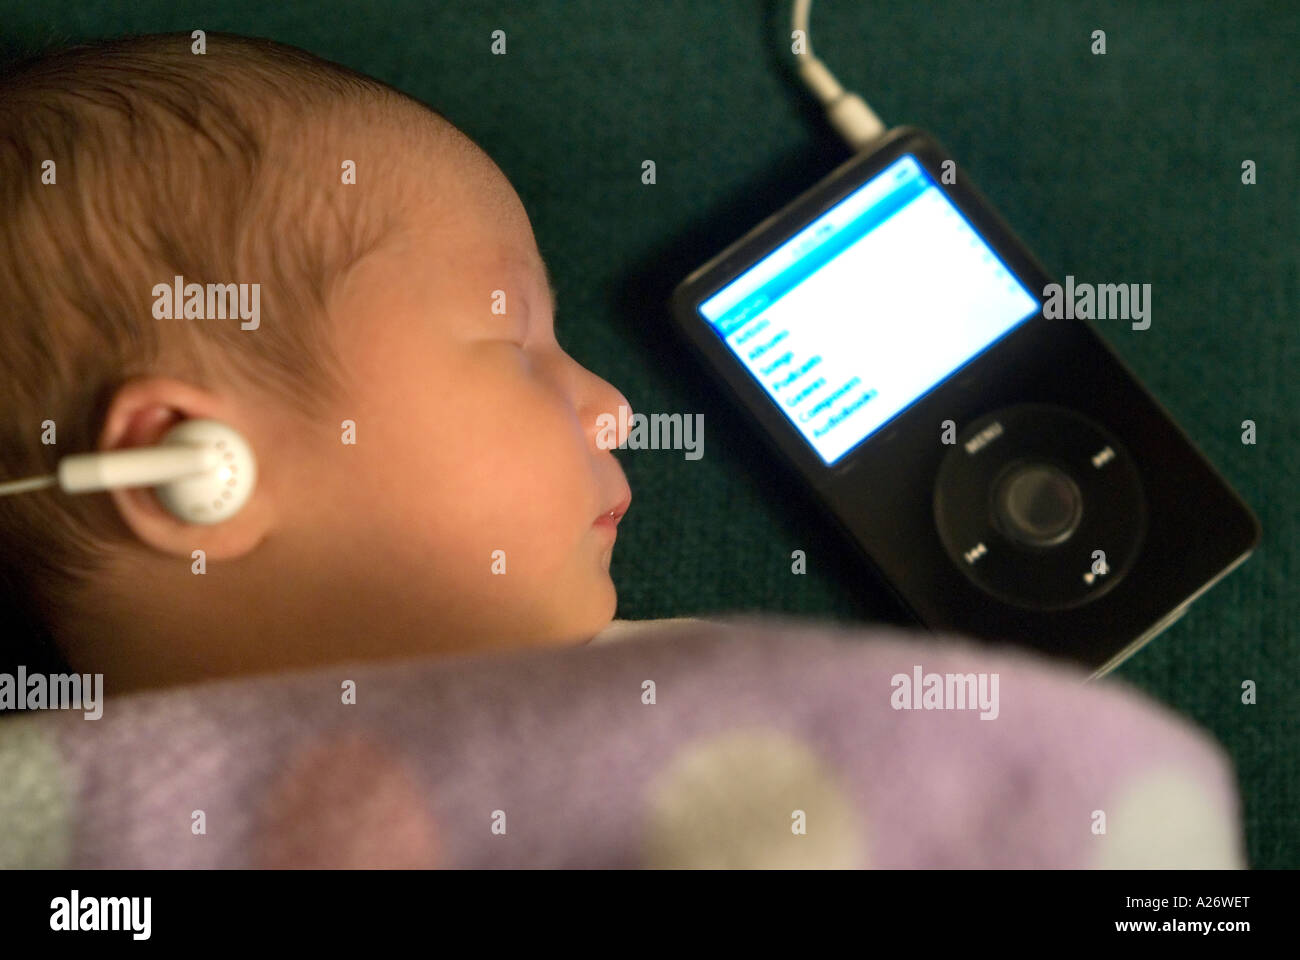 Sleeping newborn baby 7 days old Sleeping Apparently listening to classical music on an mp3 player Stock Photo